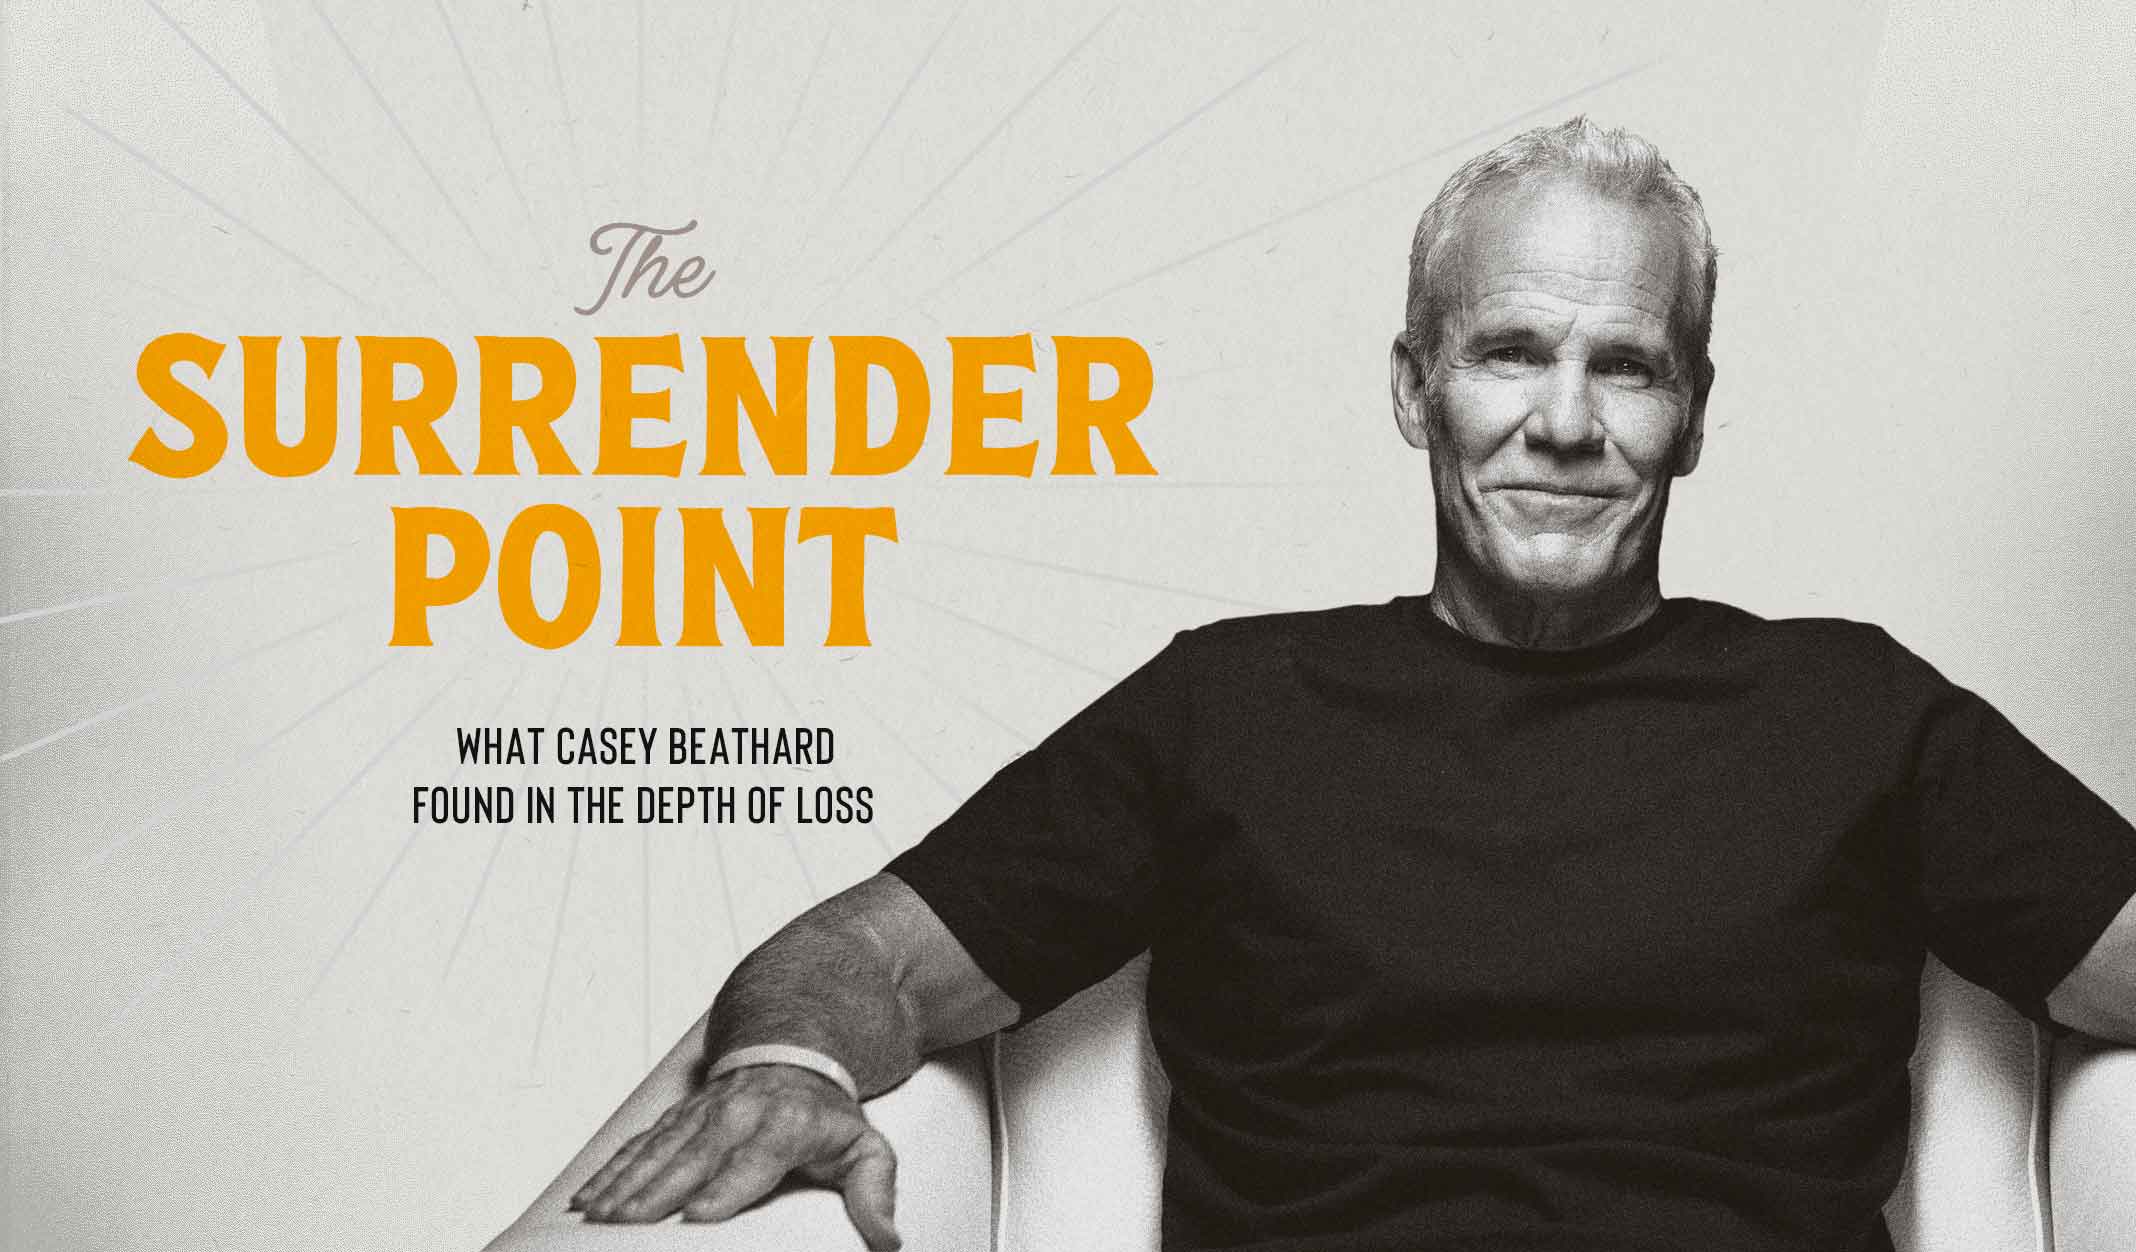 Casey Beathard: The Surrender Point